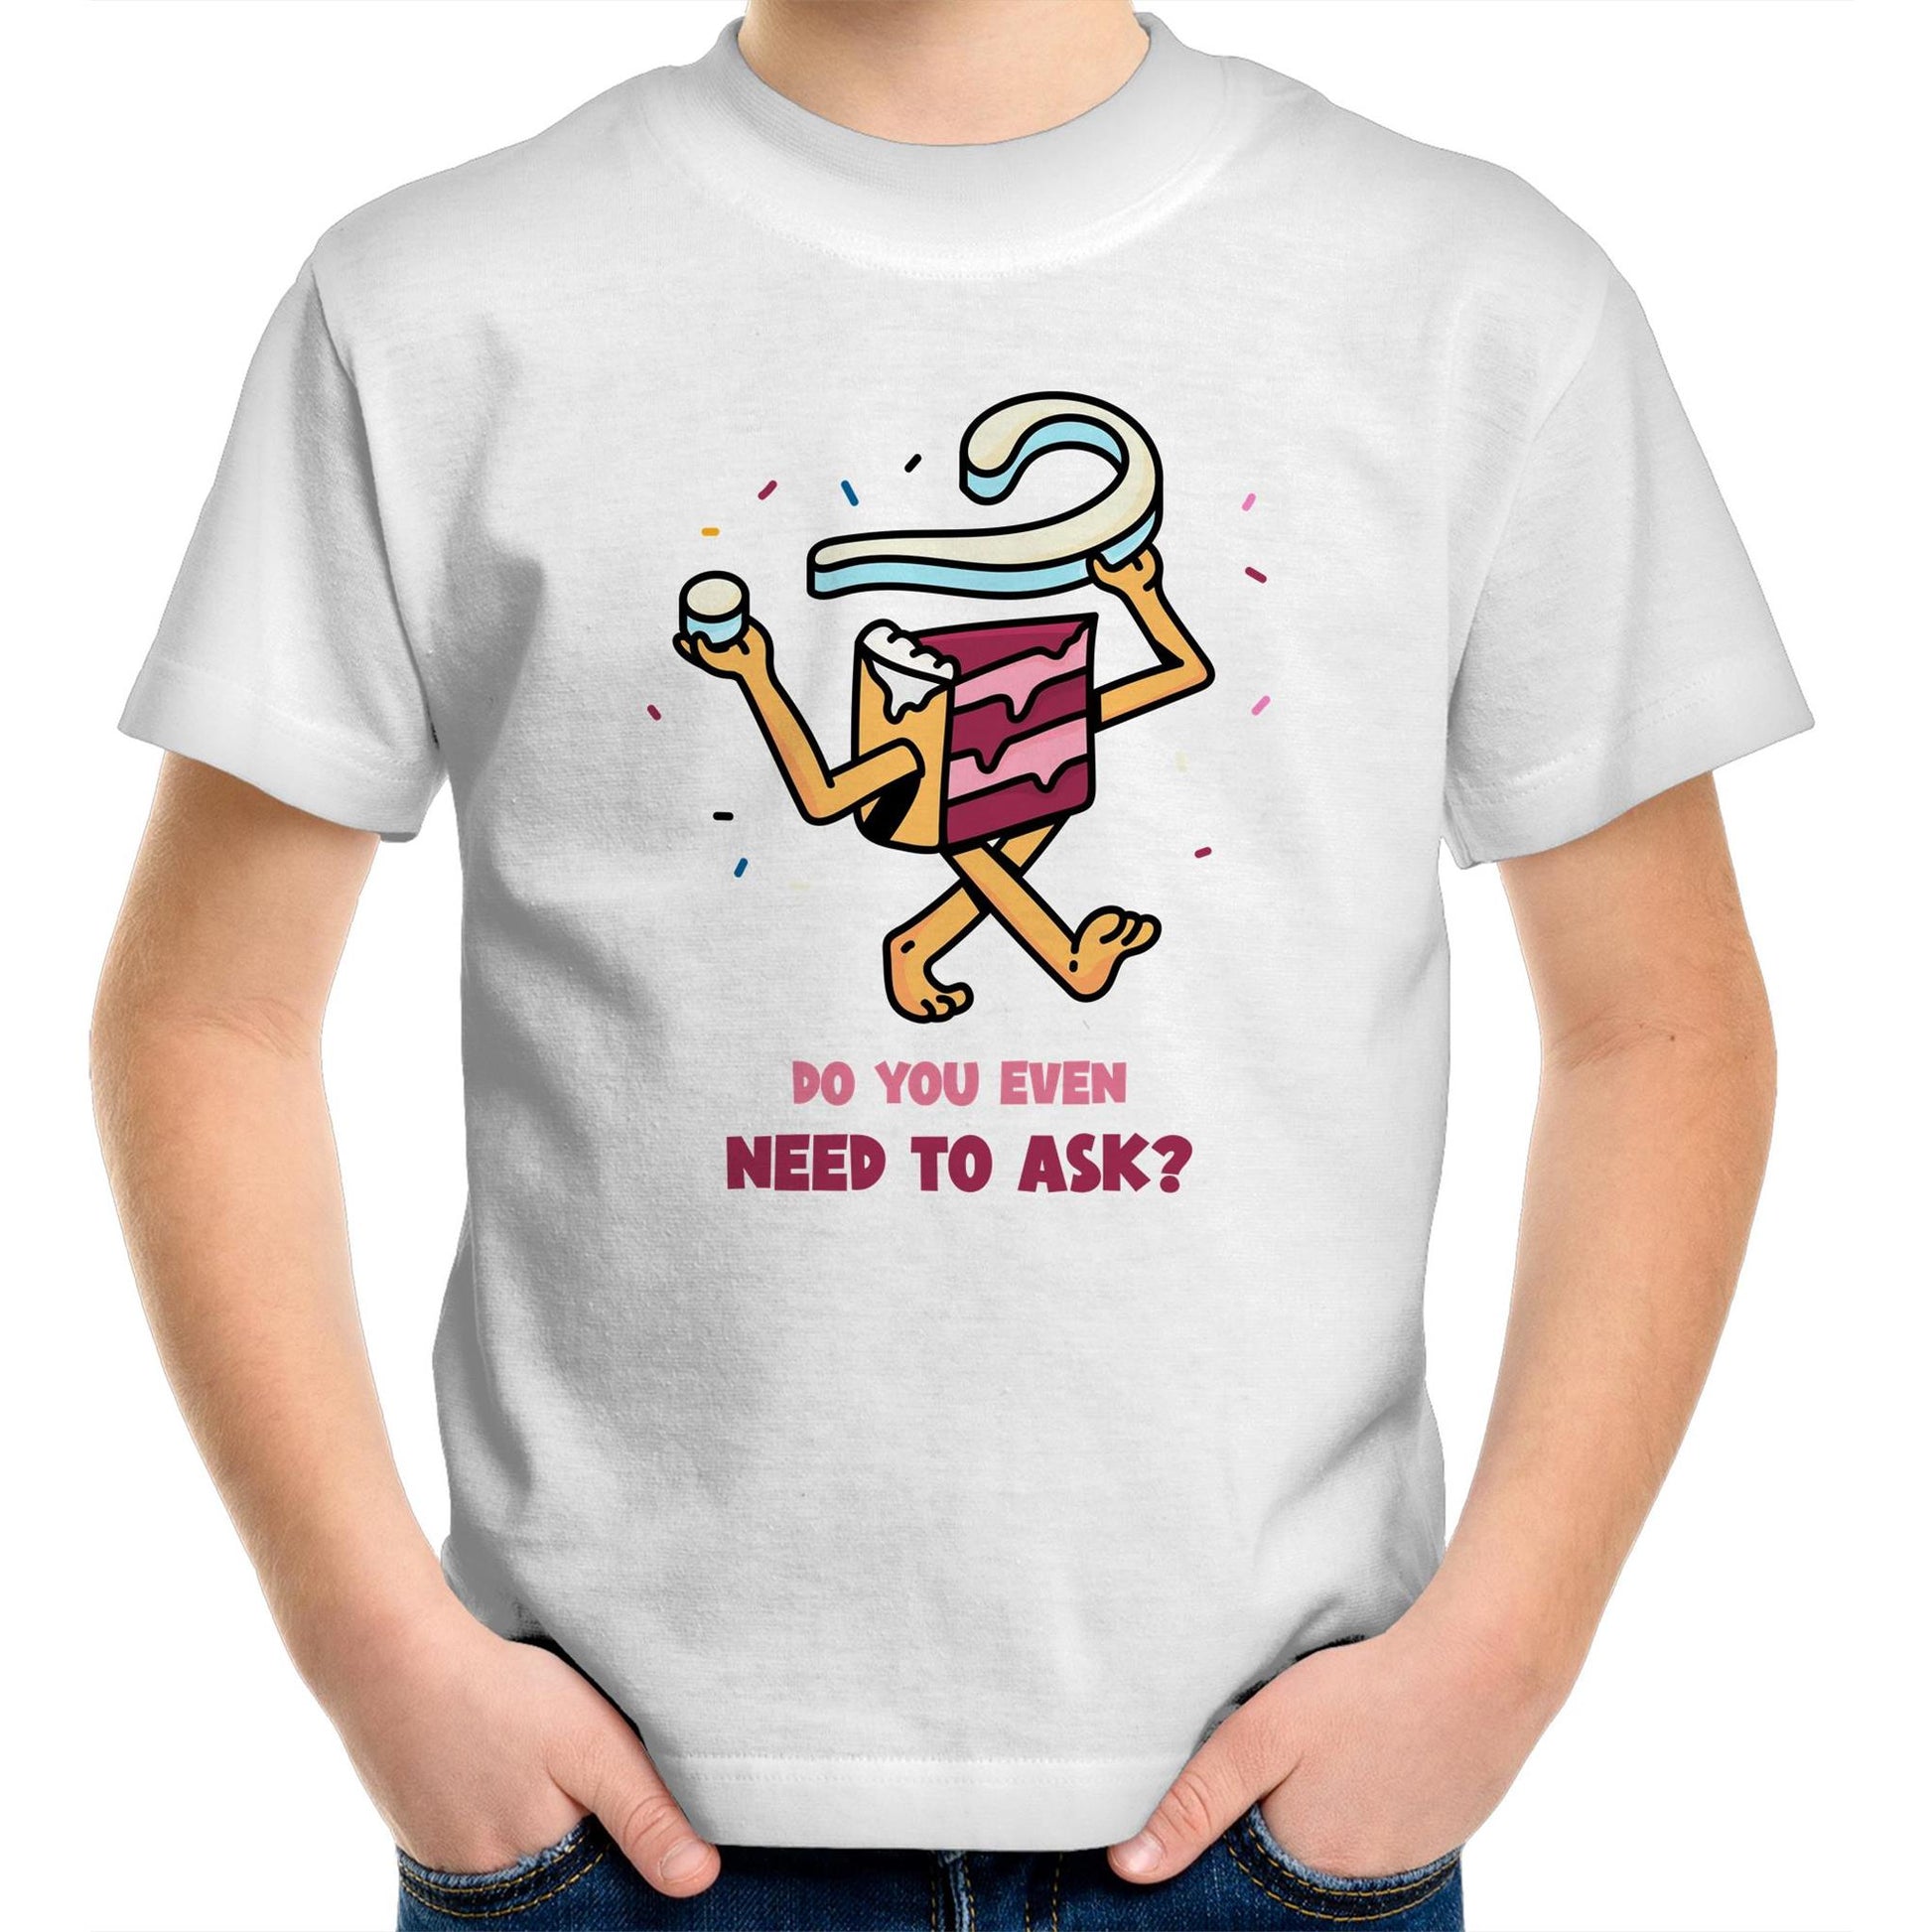 Cake, Do You Even Need To Ask - Kids Youth Crew T-Shirt White Kids Youth T-shirt